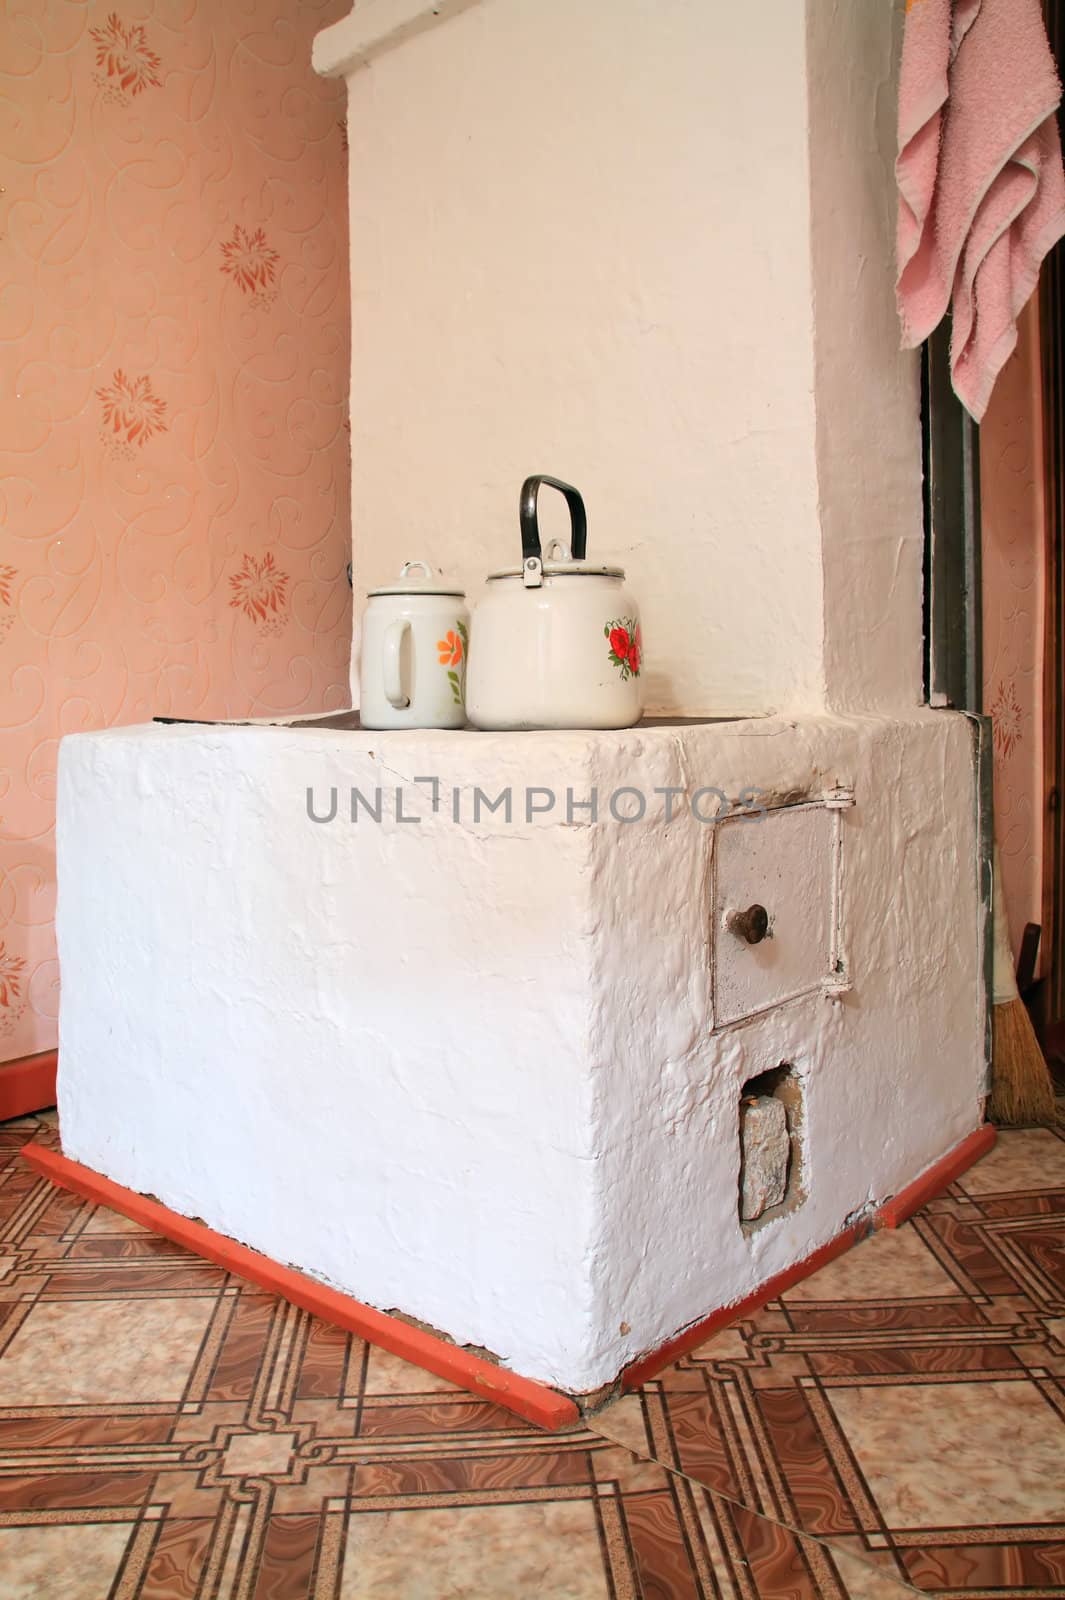 brick stove in rural wooden house by basel101658